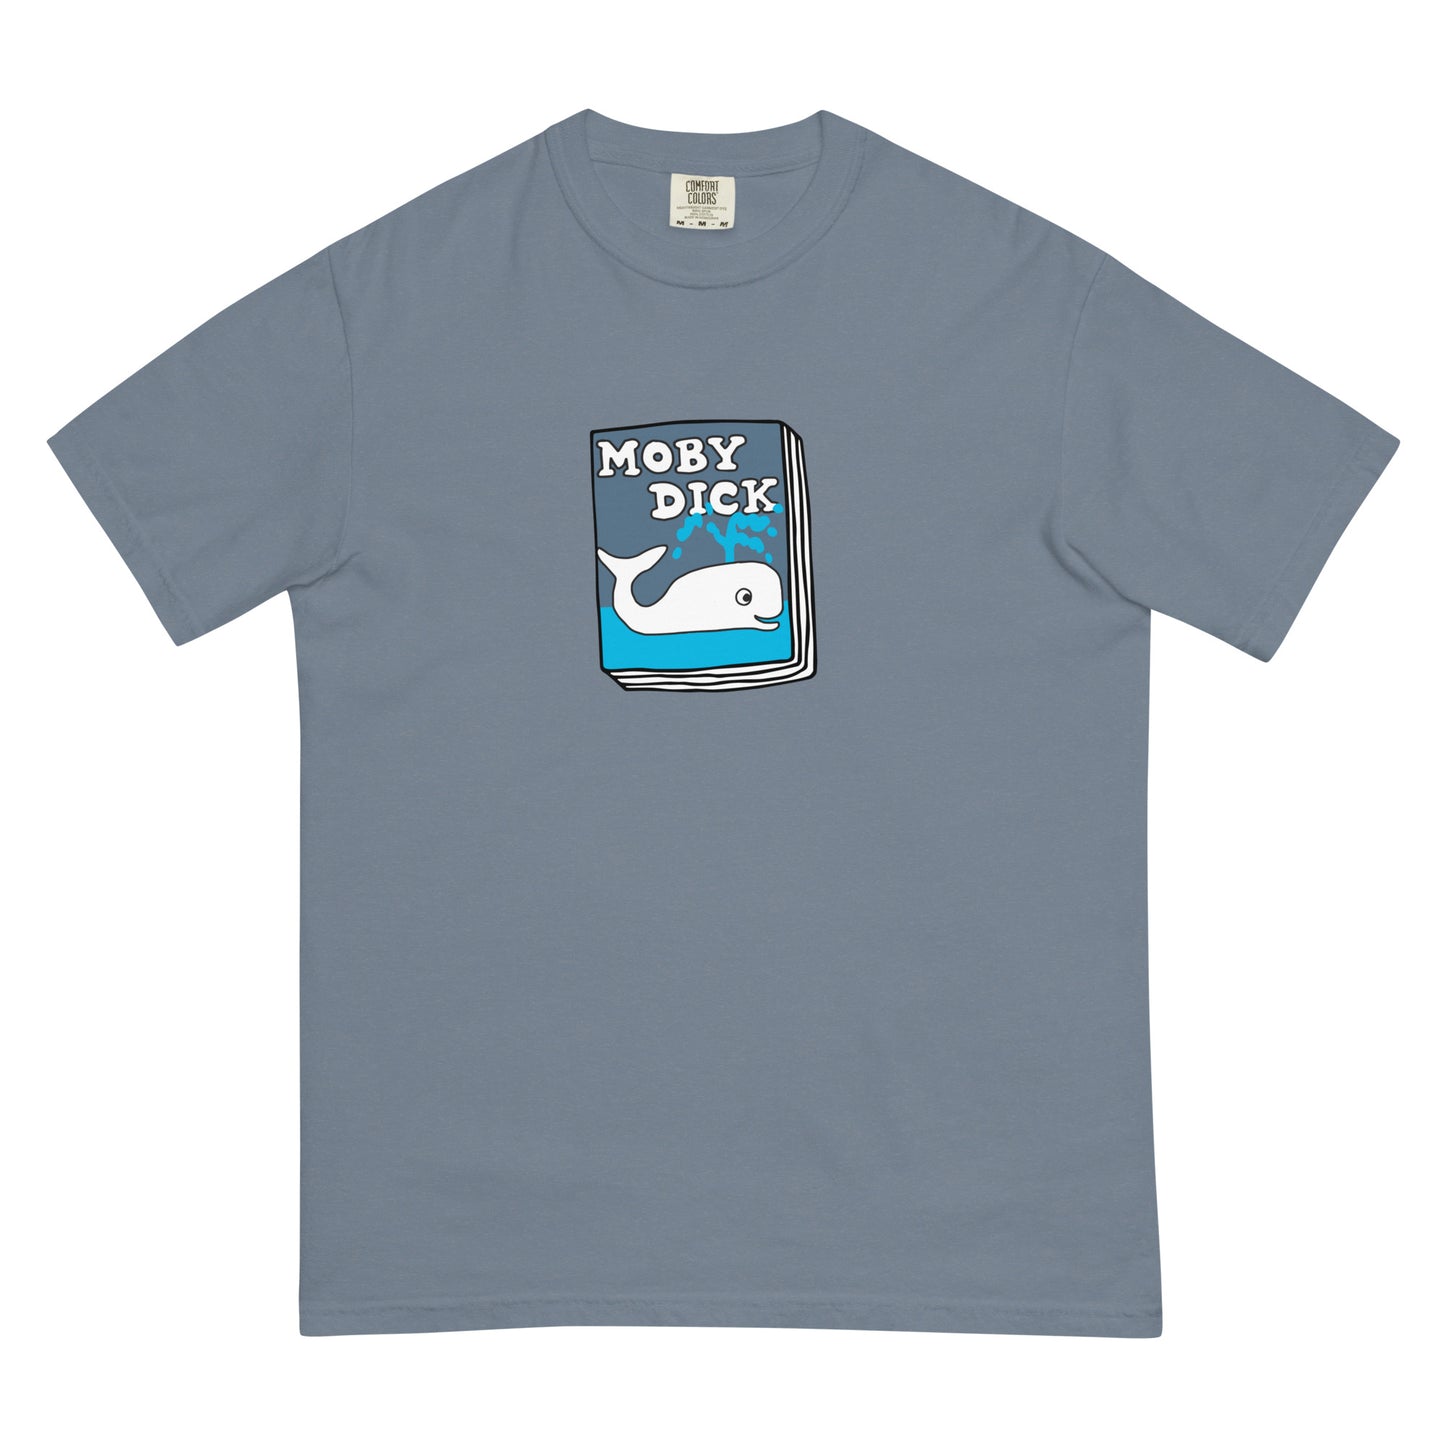 Book shirt: Moby Dick